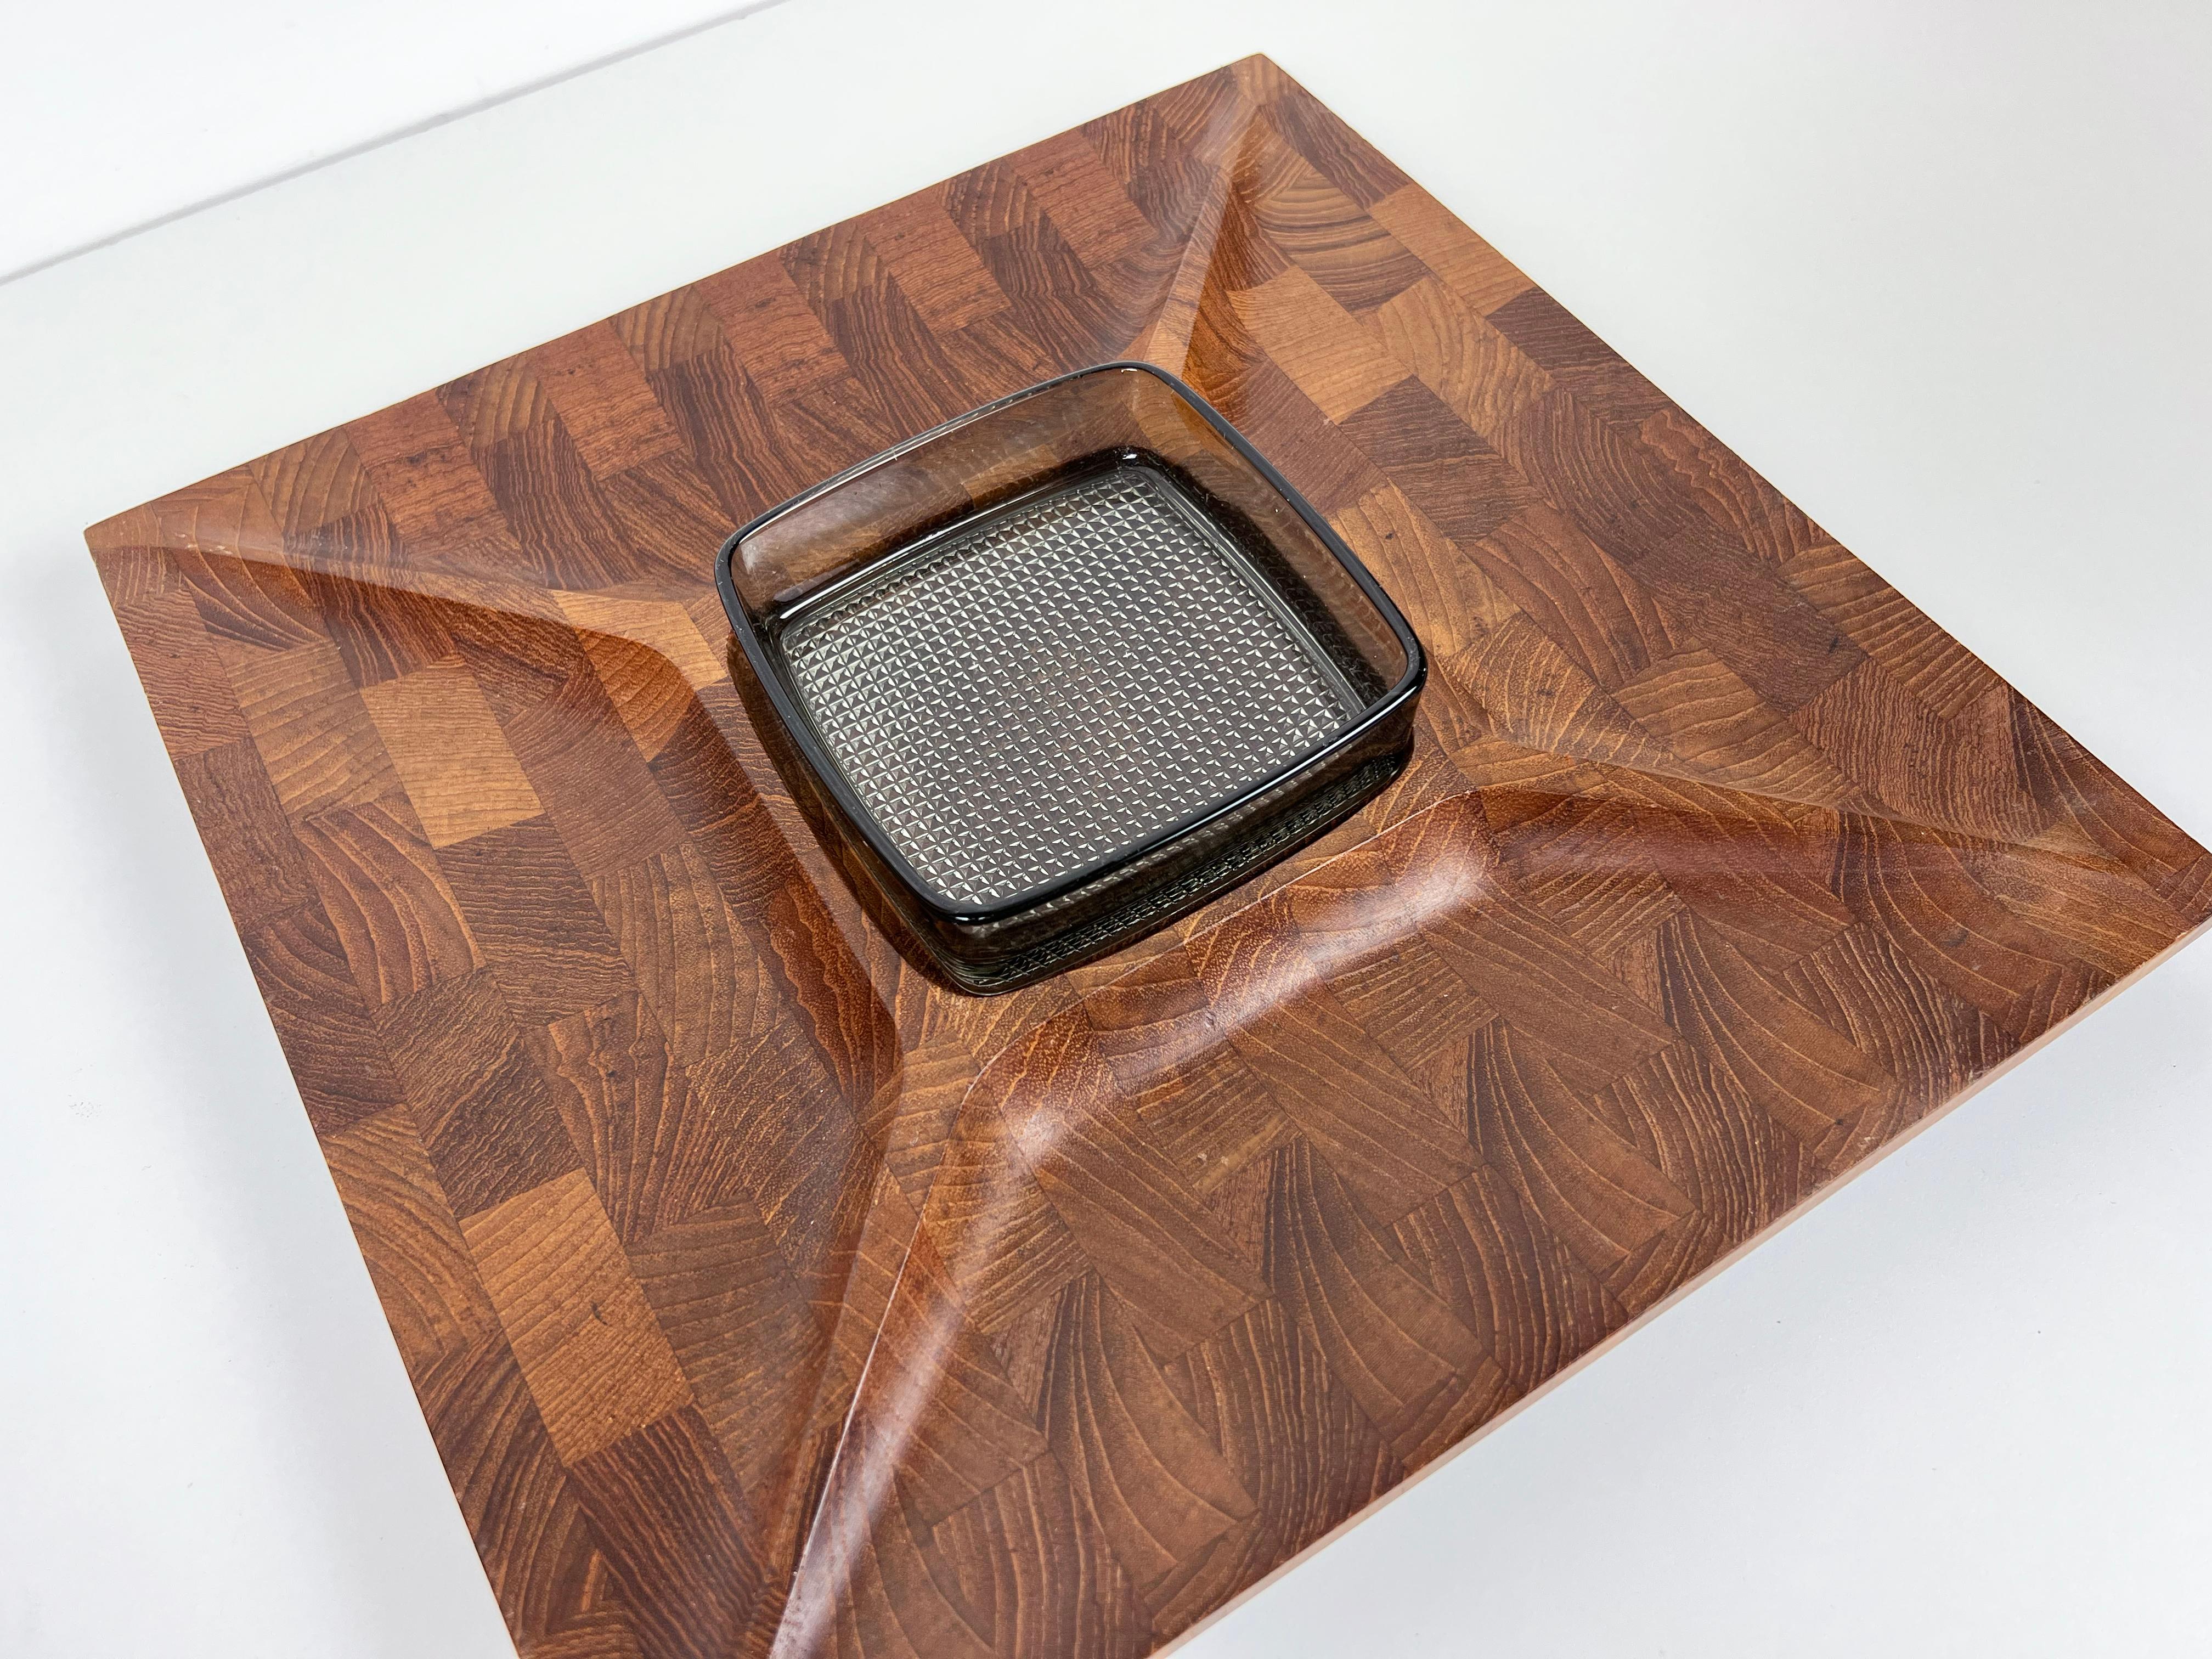 Scandinavian Modern Vintage Divided Teak Serving Tray with Glass Dish by Digsmed For Sale